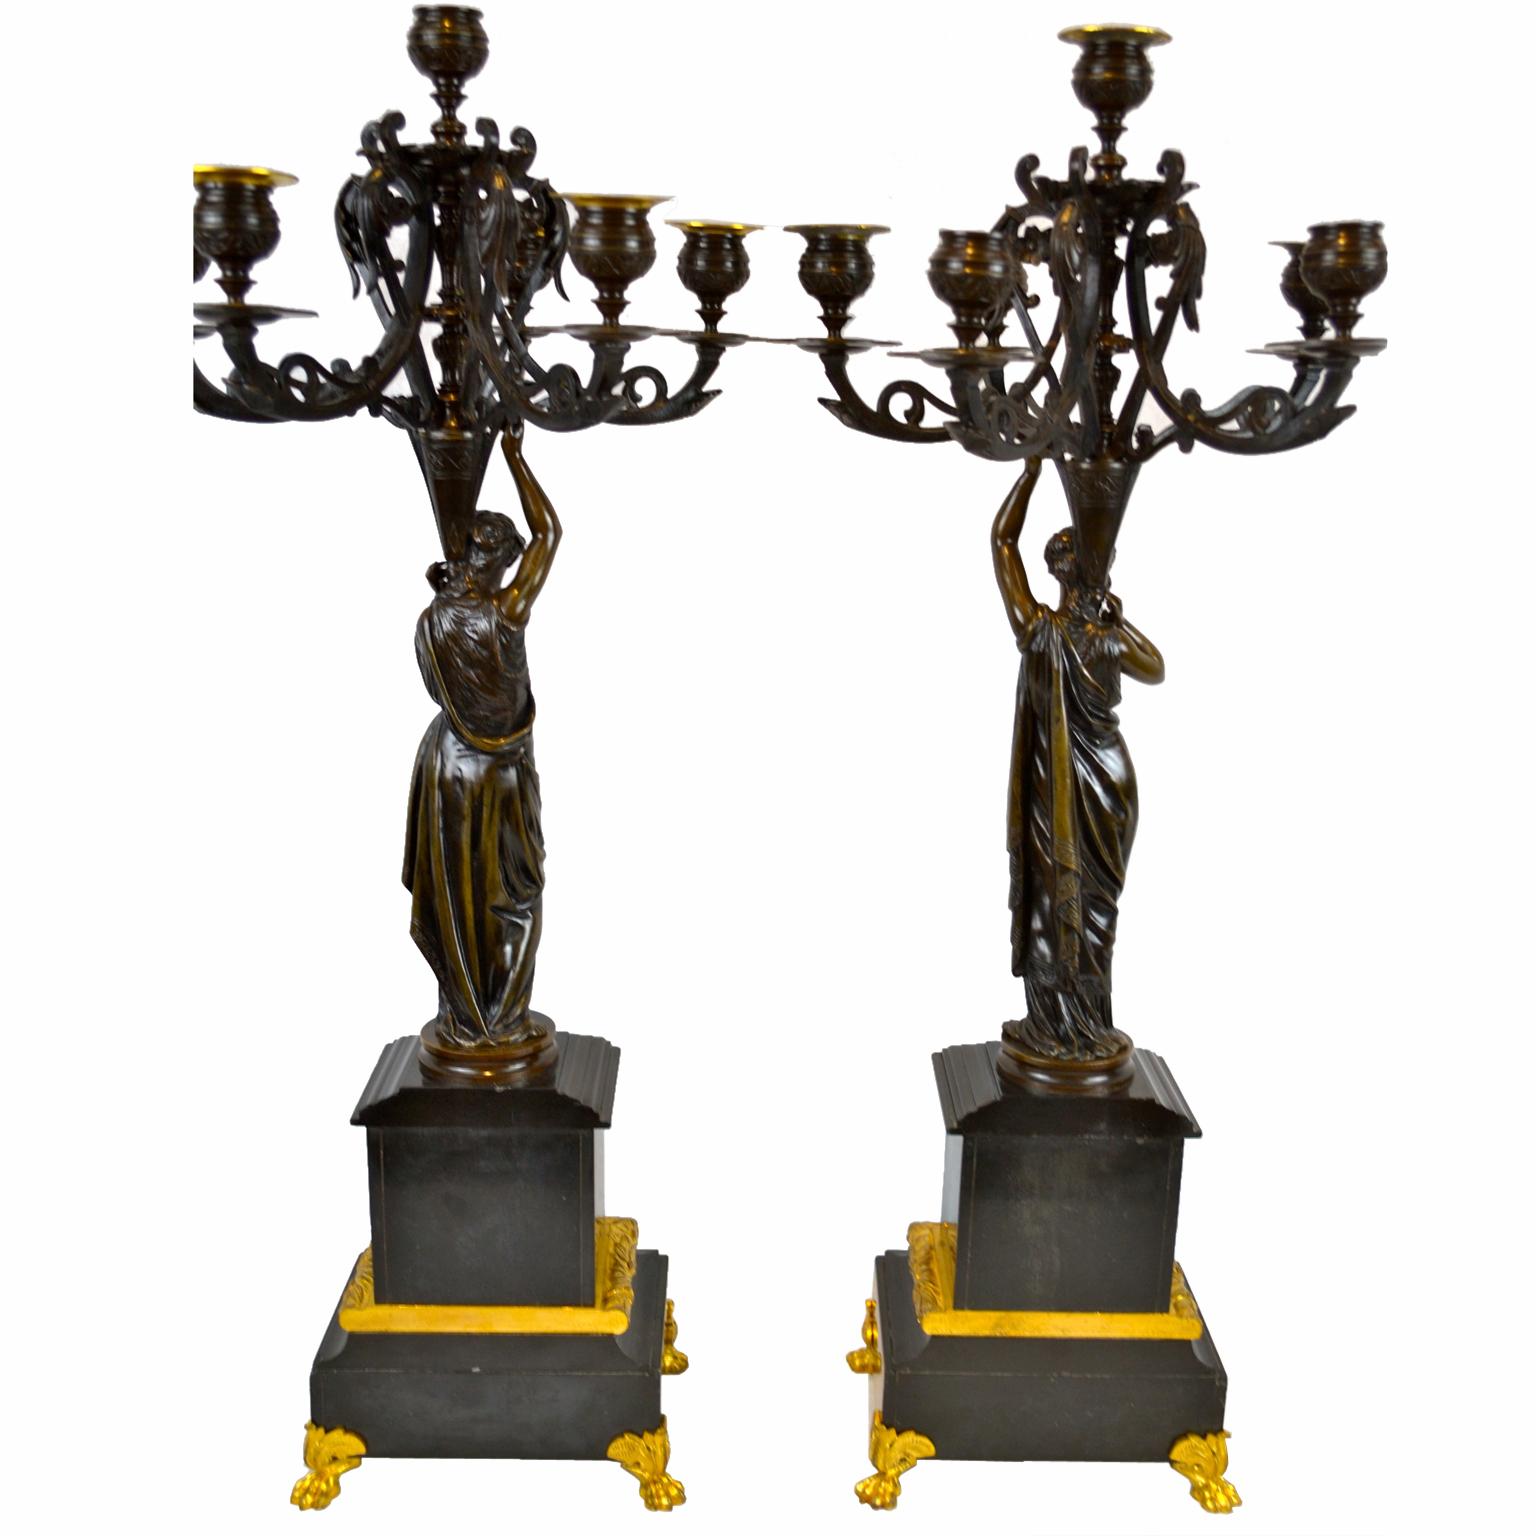 Very well cast models of classical maidens standing on decorated stepped rectangular black marble bases, the upper base mounted with an Etruscan style frieze; the bases have gilt bronze trim and gilt bronze lions feet. Each maiden holds aloft a